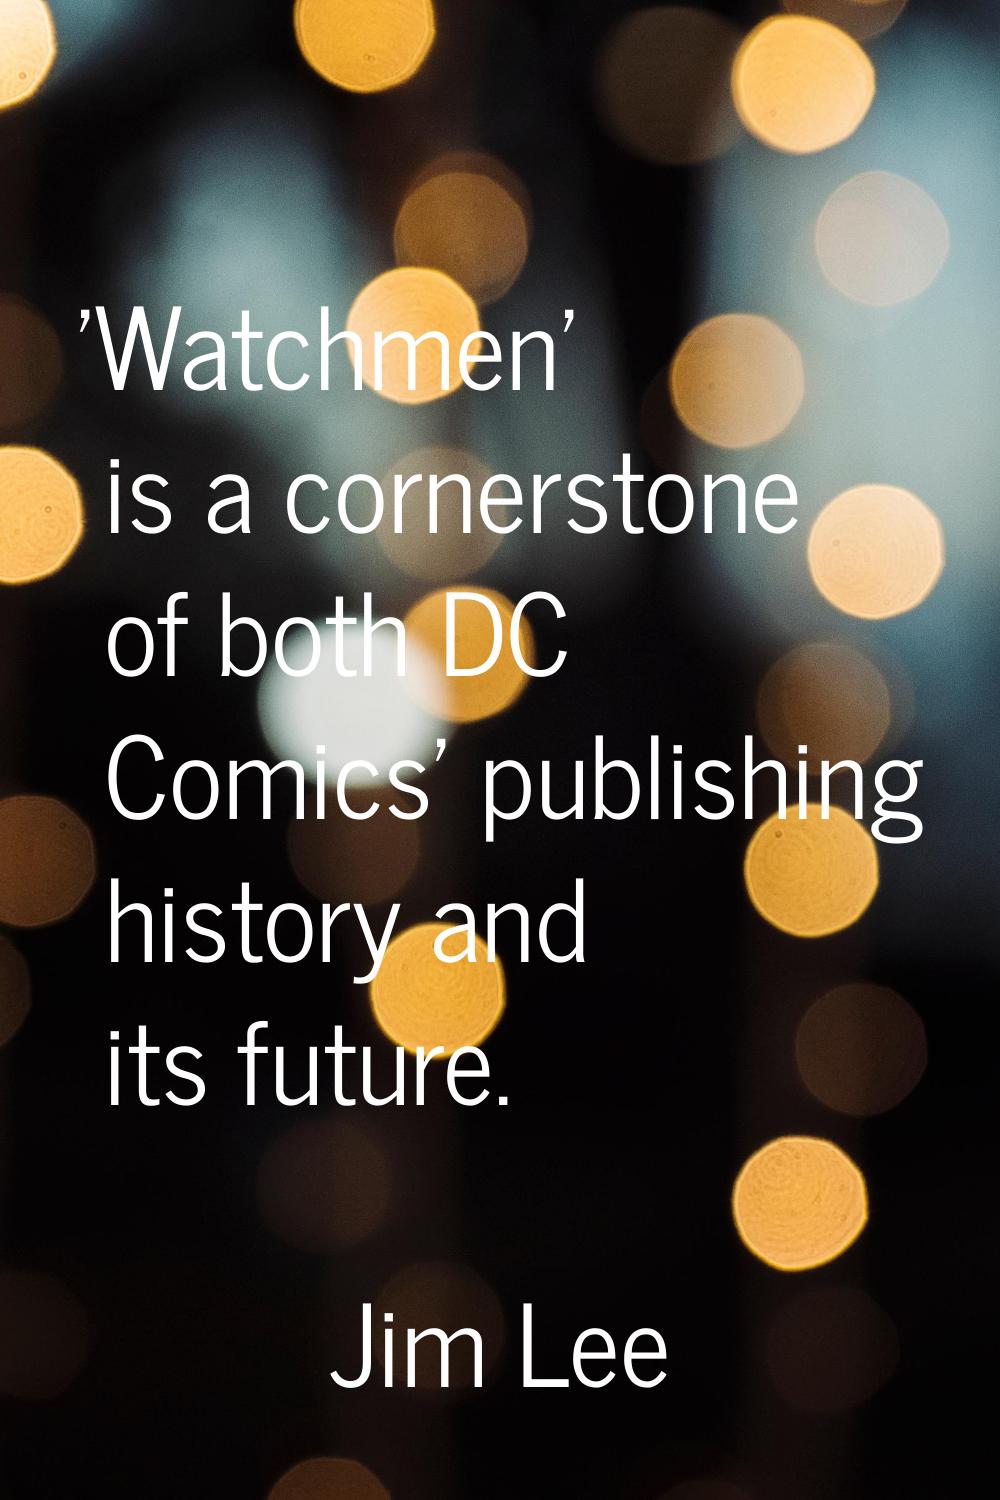 'Watchmen' is a cornerstone of both DC Comics' publishing history and its future.